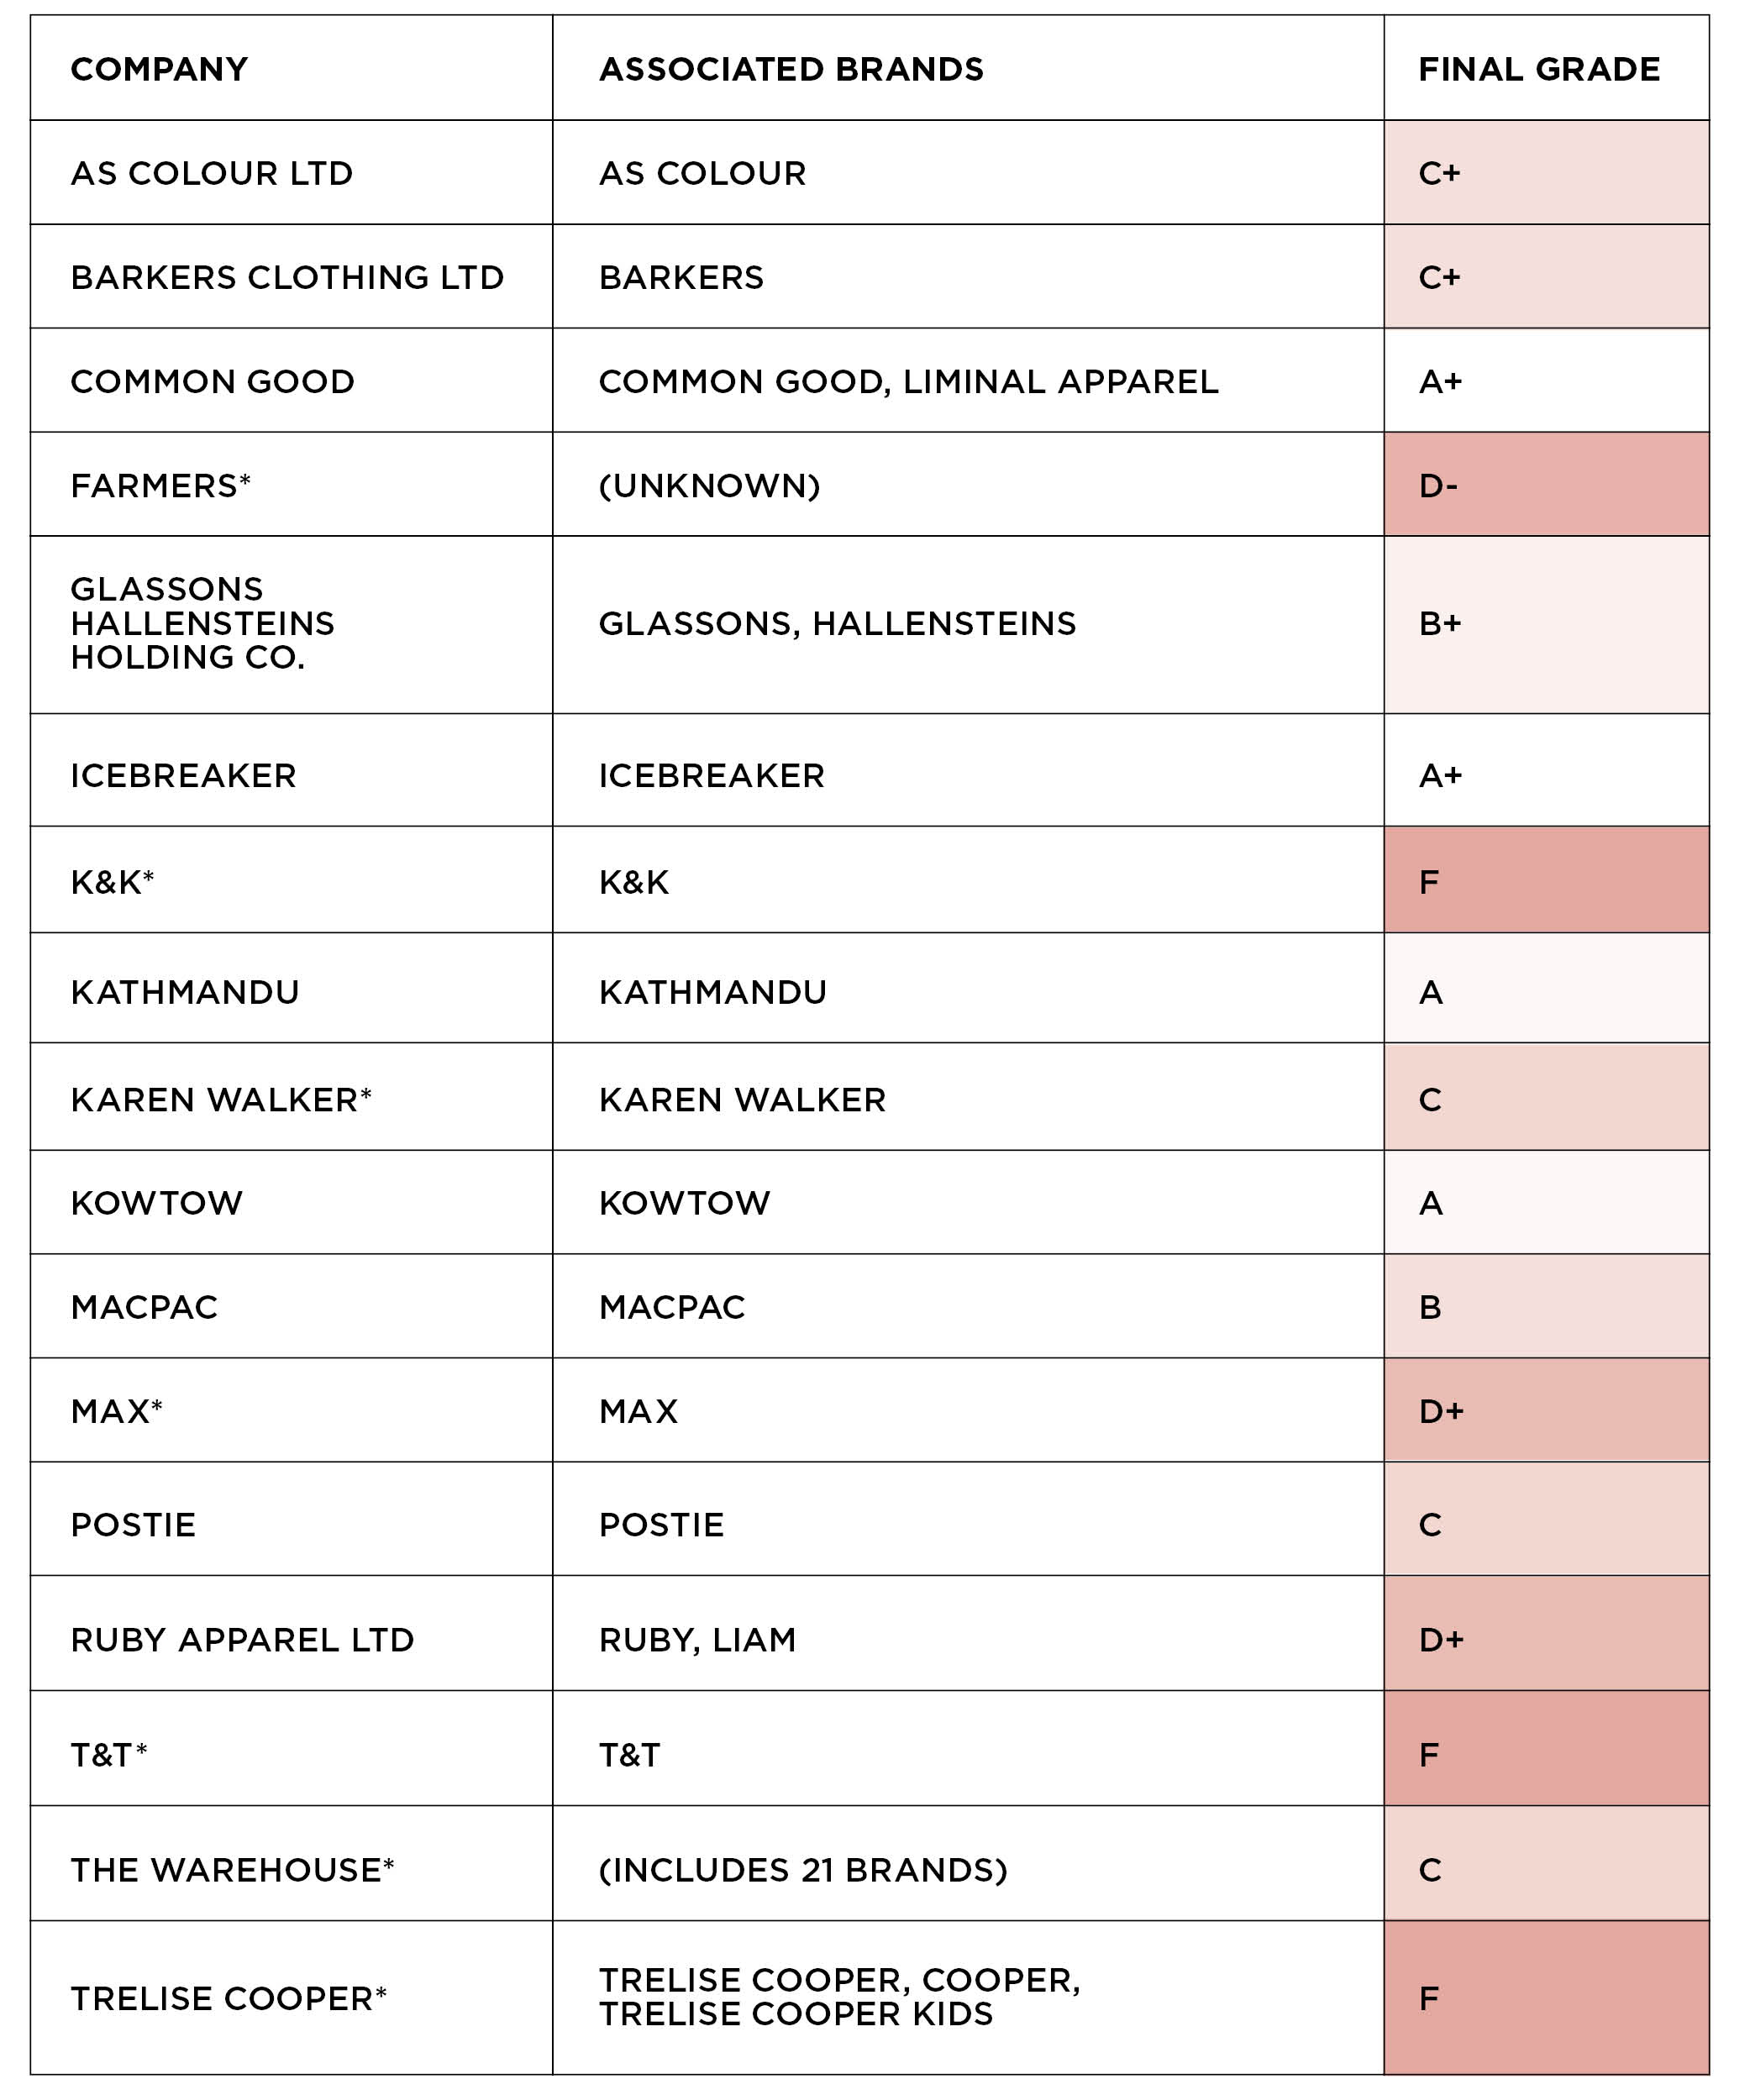 2018-Ethical-fashion-report-Company Grades_updated